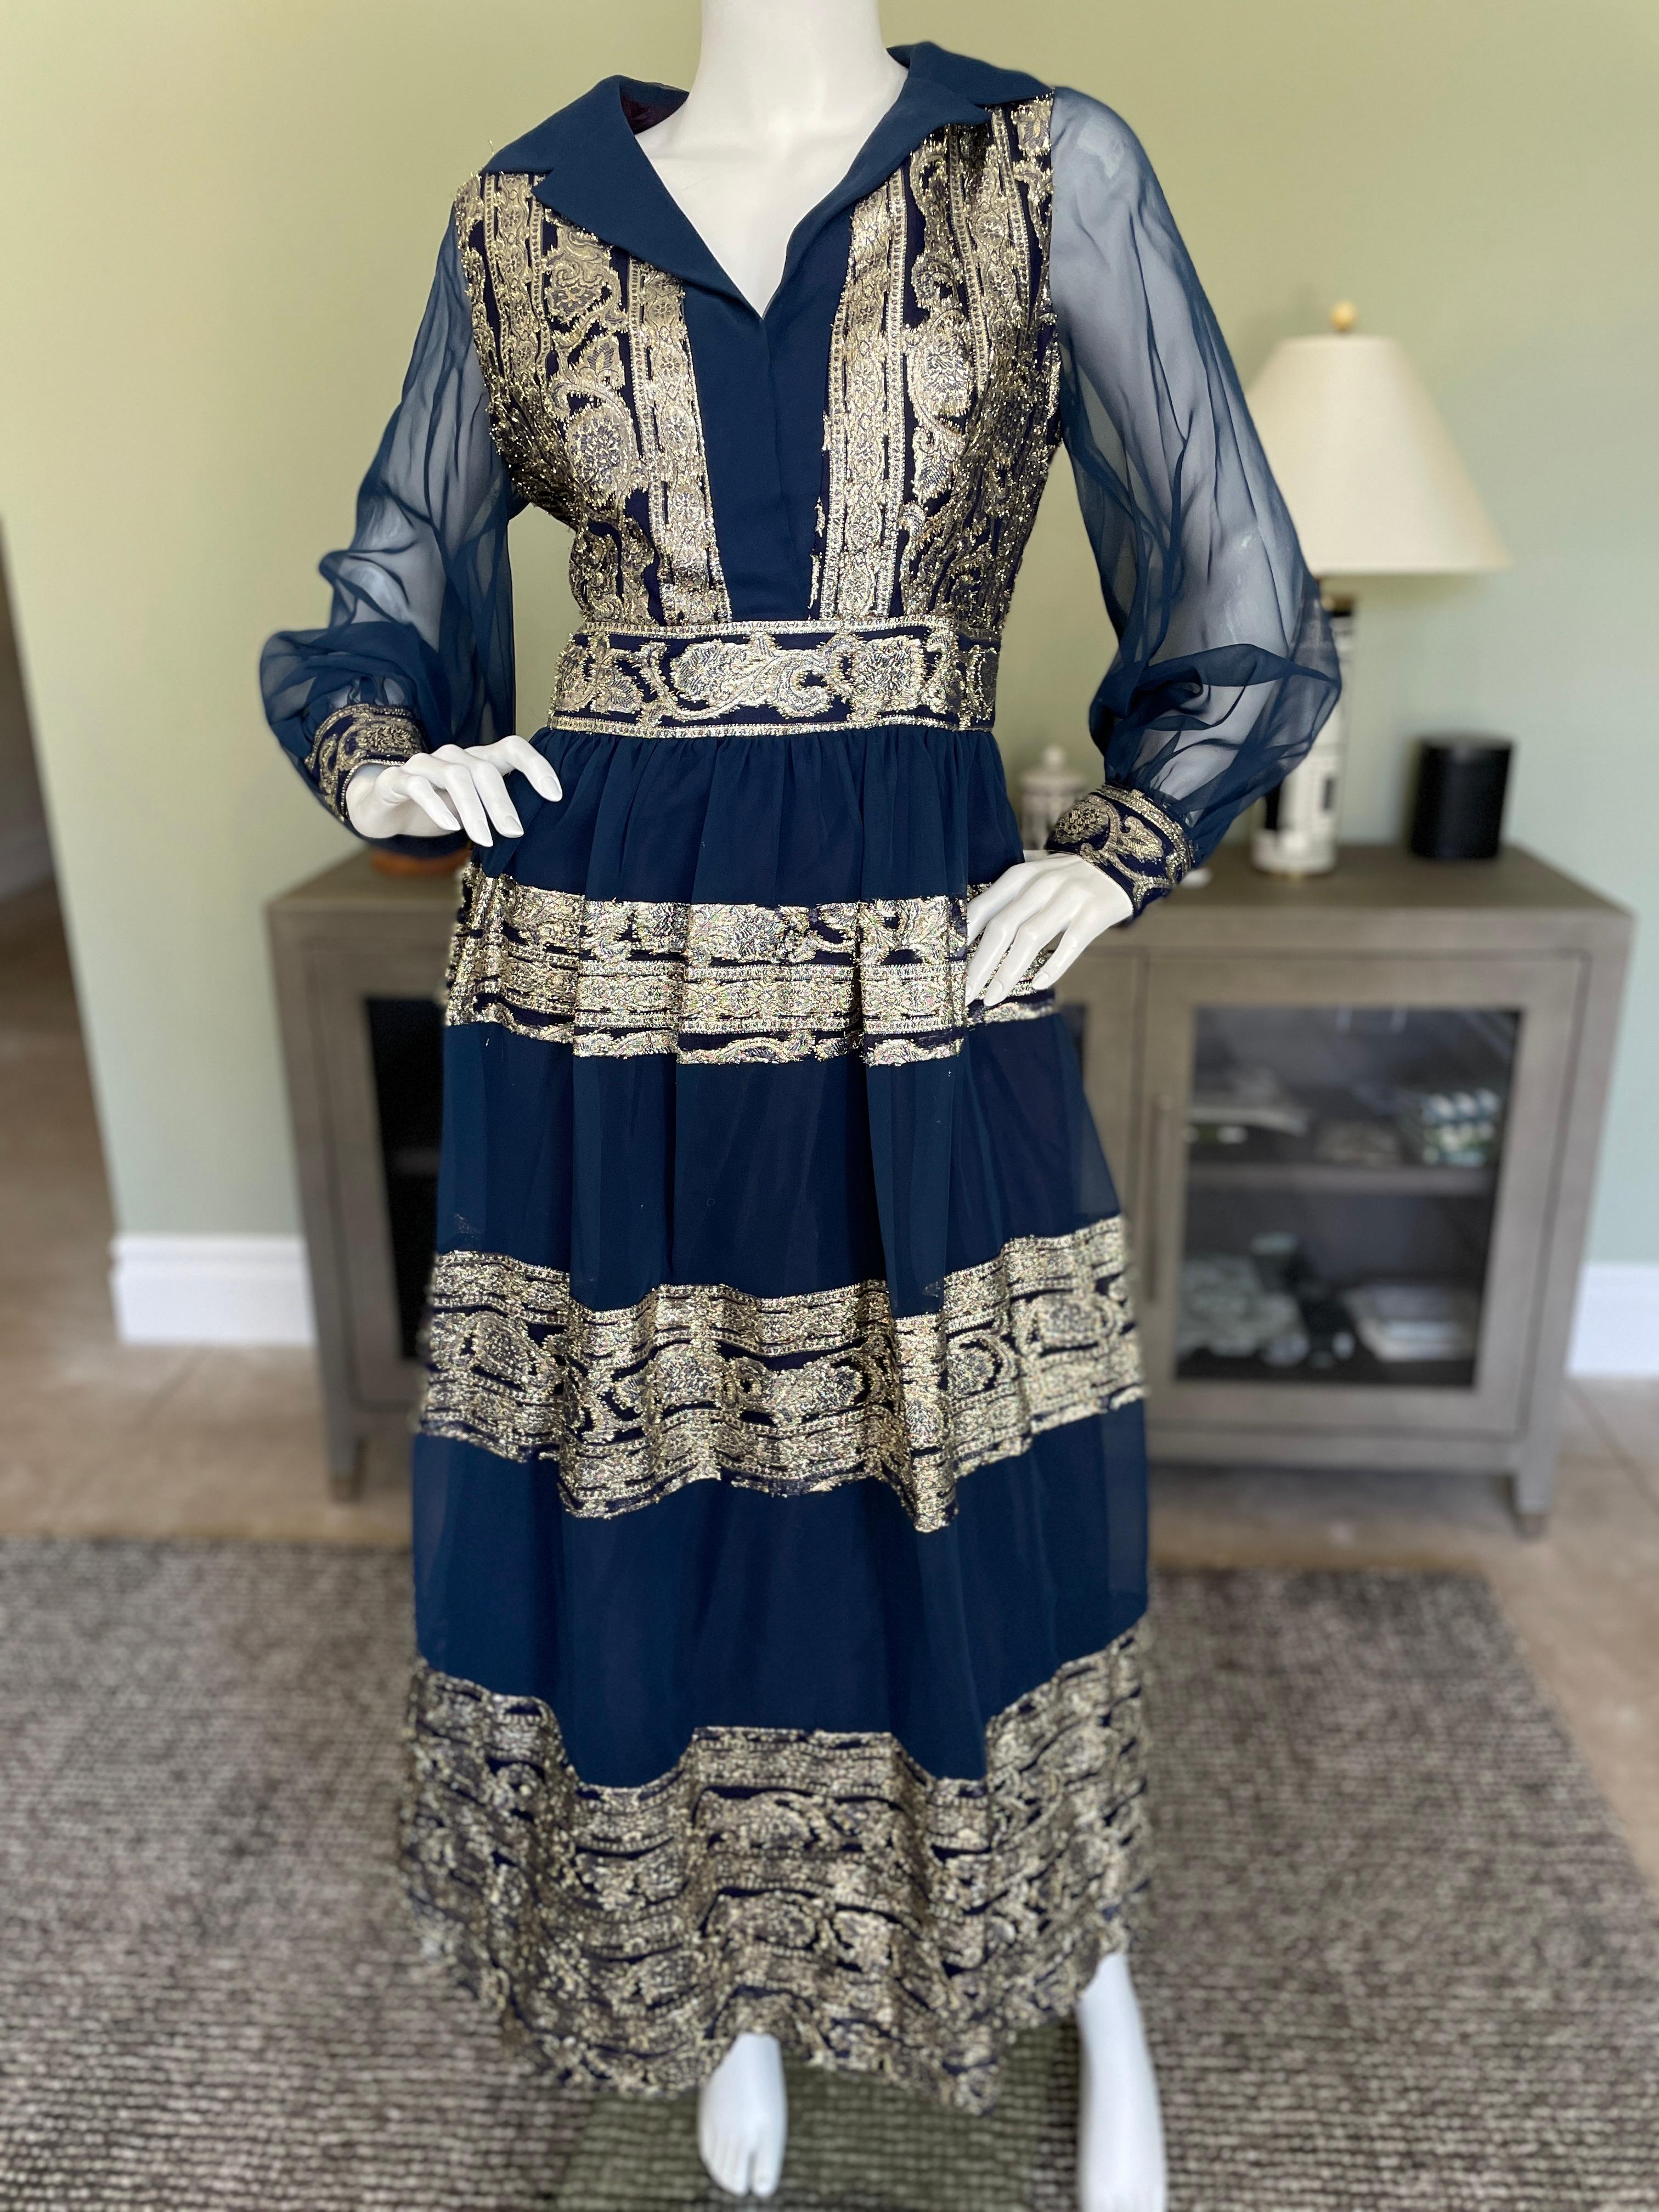 Oscar de la Renta  1970's Metallic Gold and Navy Cocktail Dress
Stunning. Please use the zoom feature to see all the remarkable details. 
 Size 4-6 (no size label)
 Bust 39